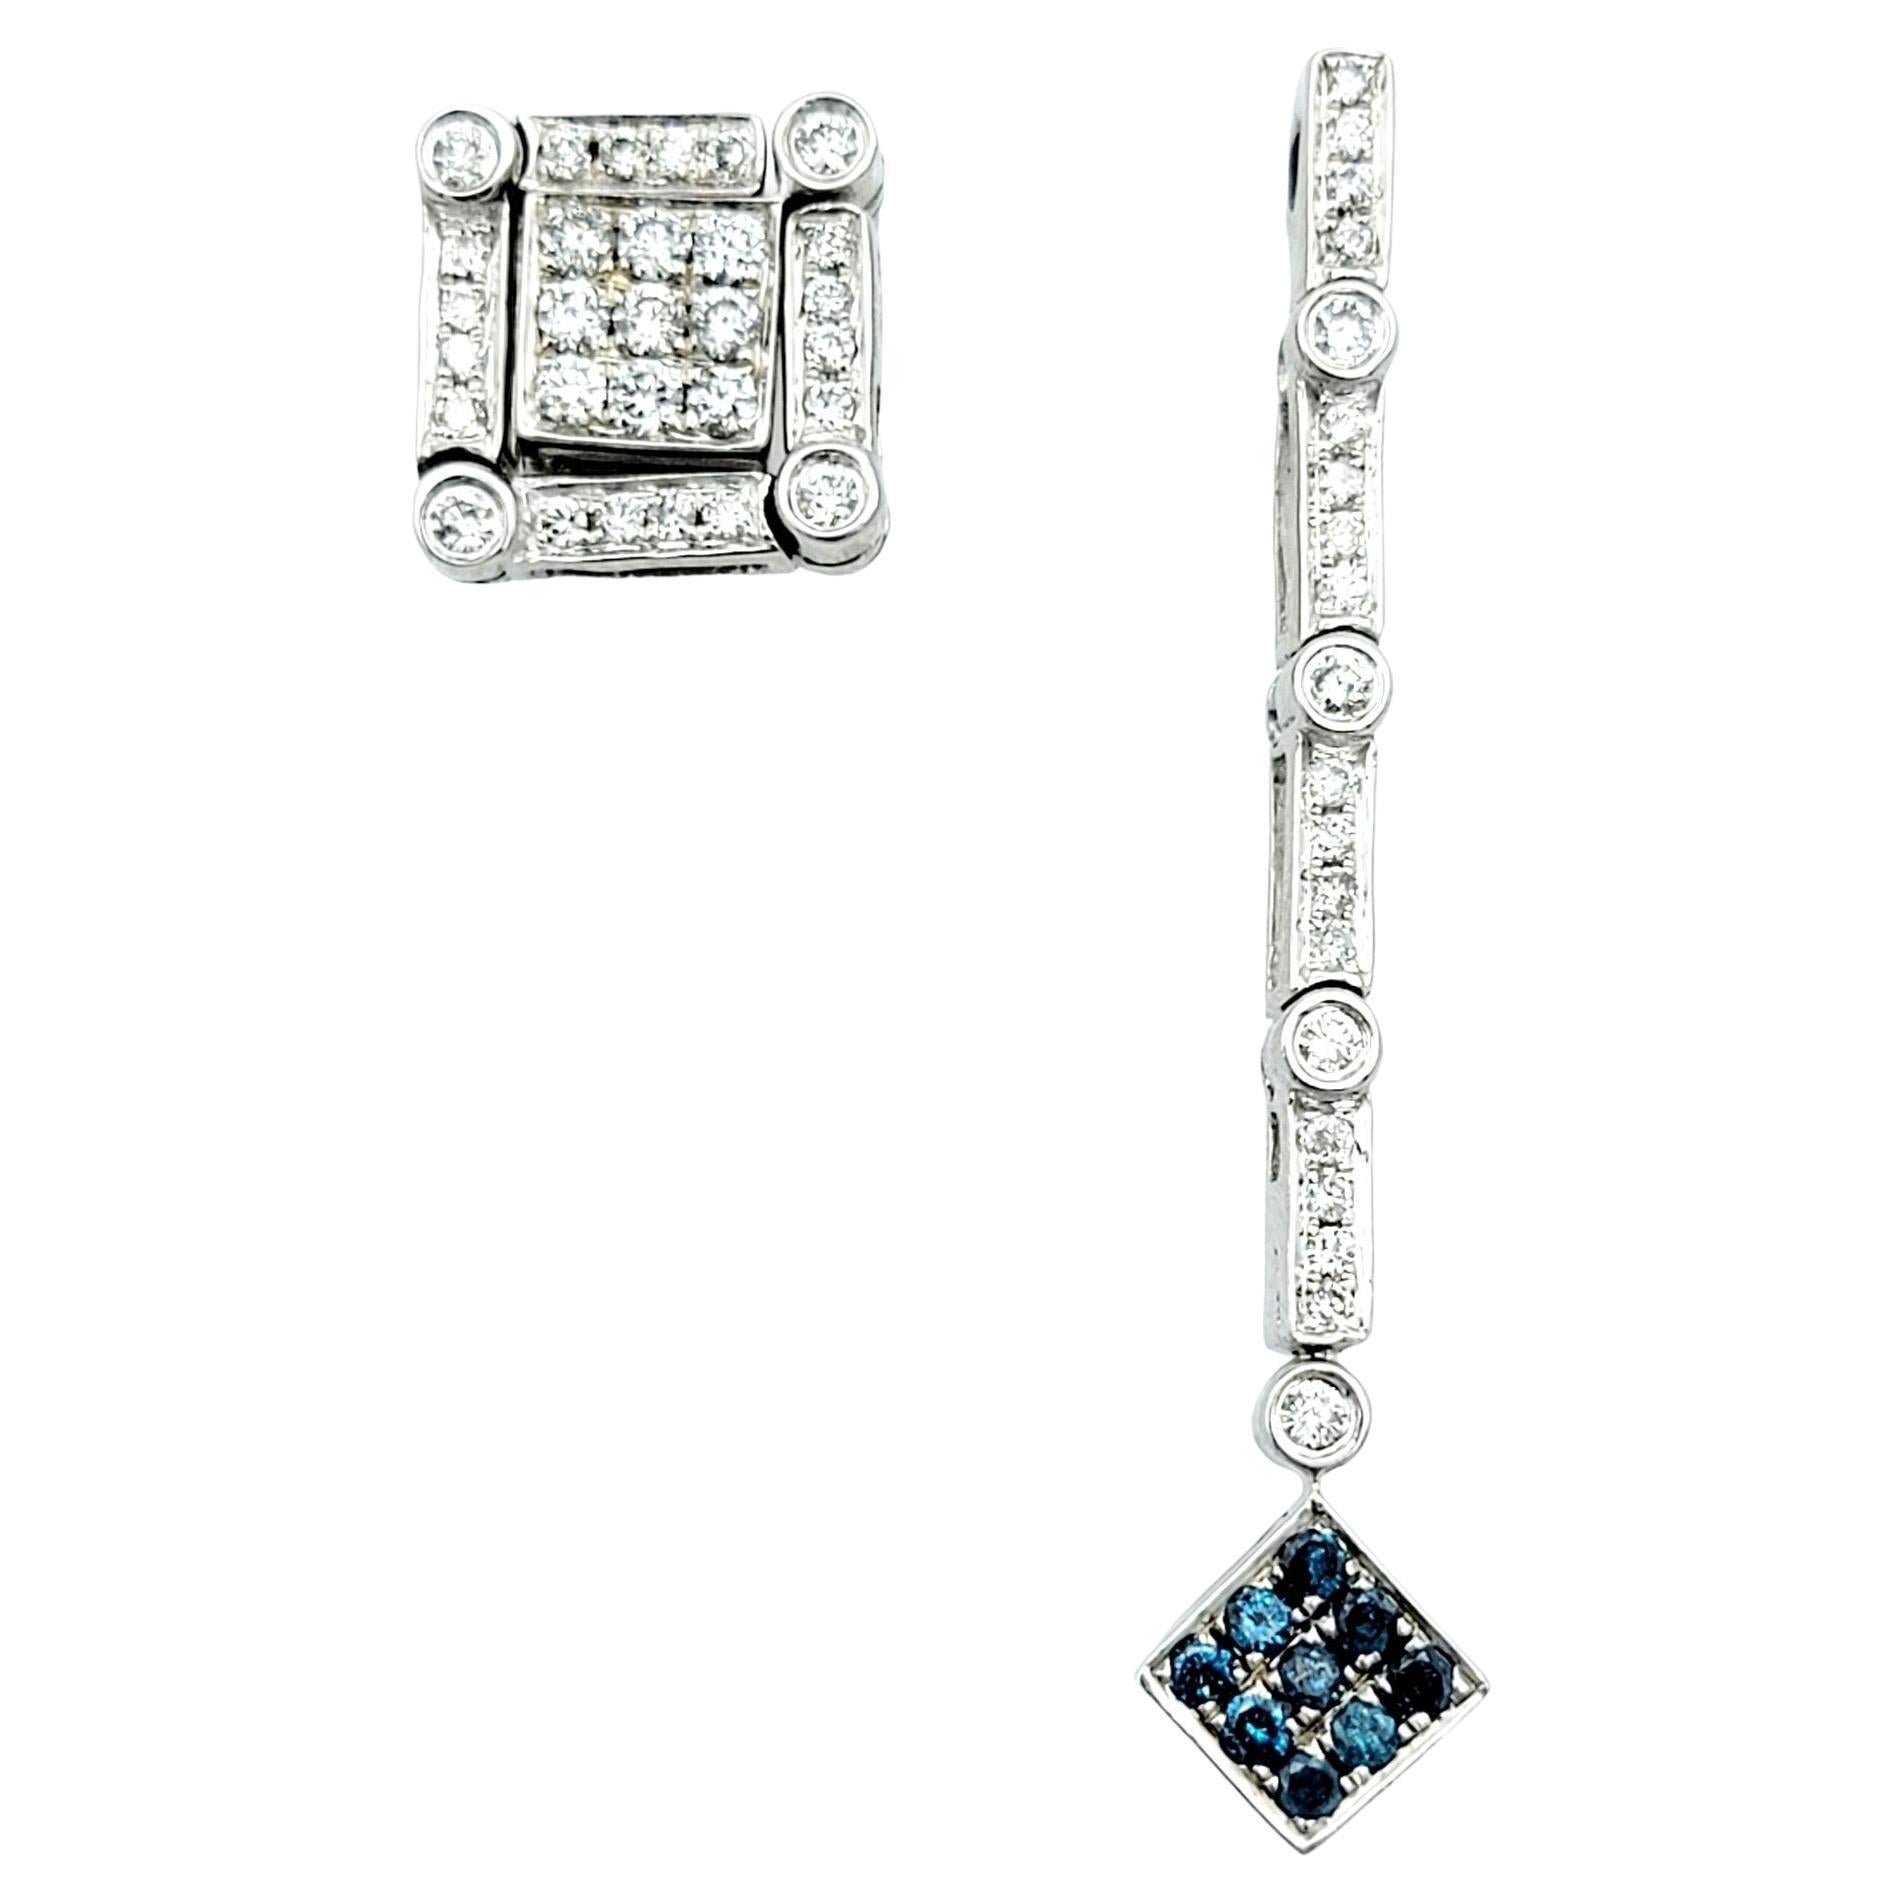 Convertible White & Blue Diamond 4 Way Stud and Dangle 14K White Gold Earrings For Sale